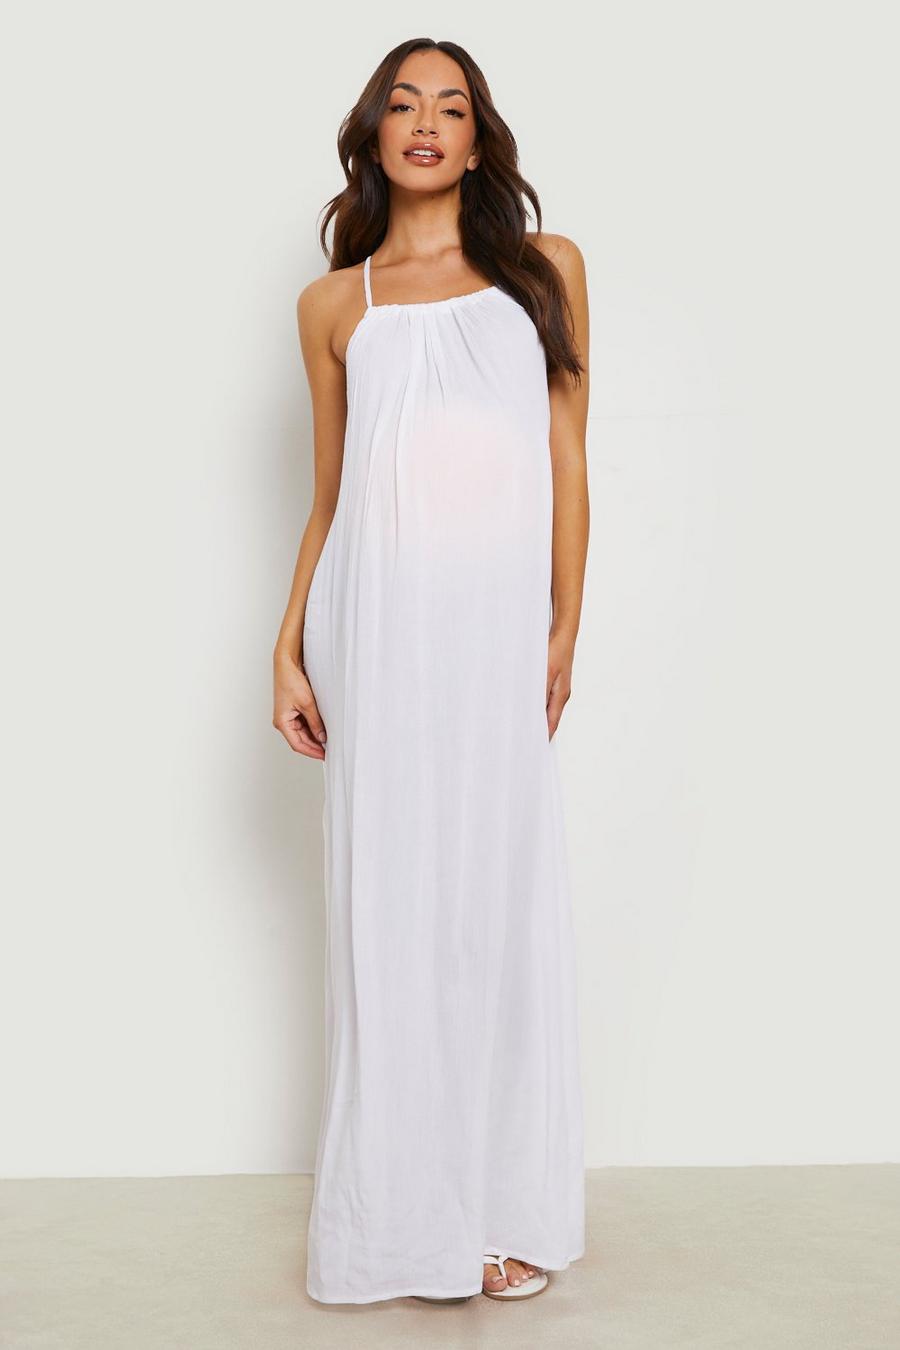 White Maternity Cheesecloth Strappy Beach Dress